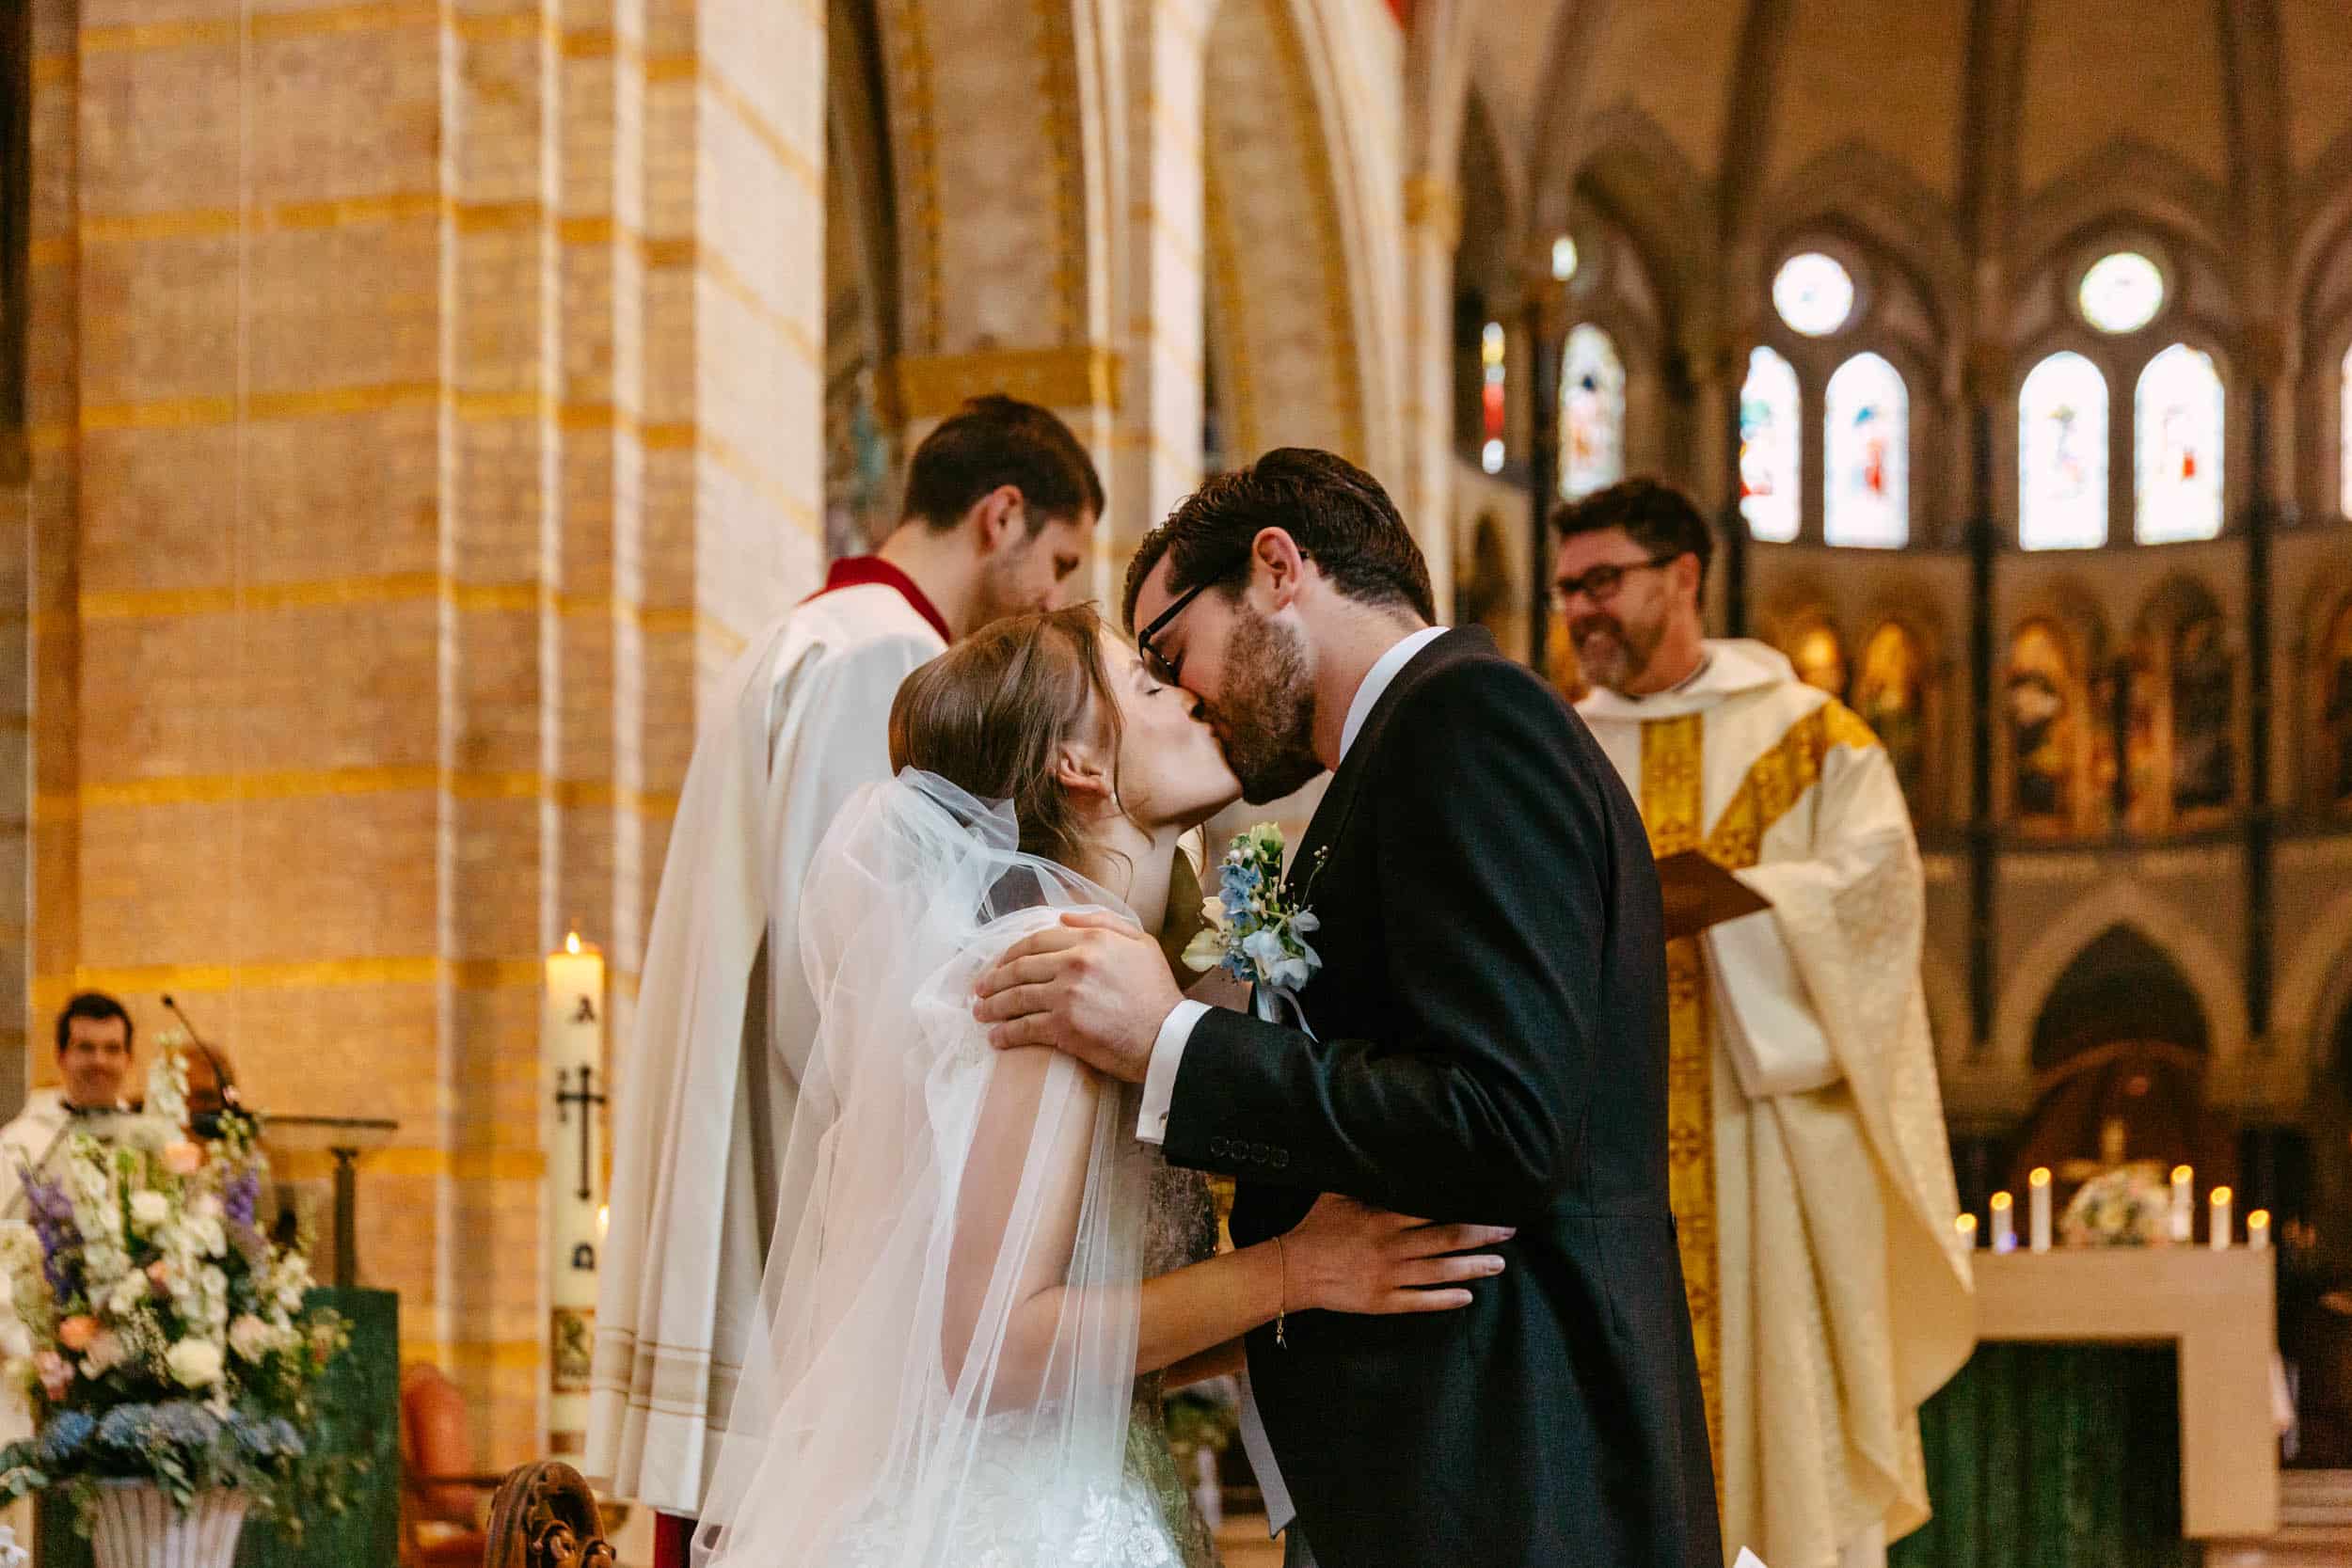 A bride and groom kissing at a Wedding in a church.